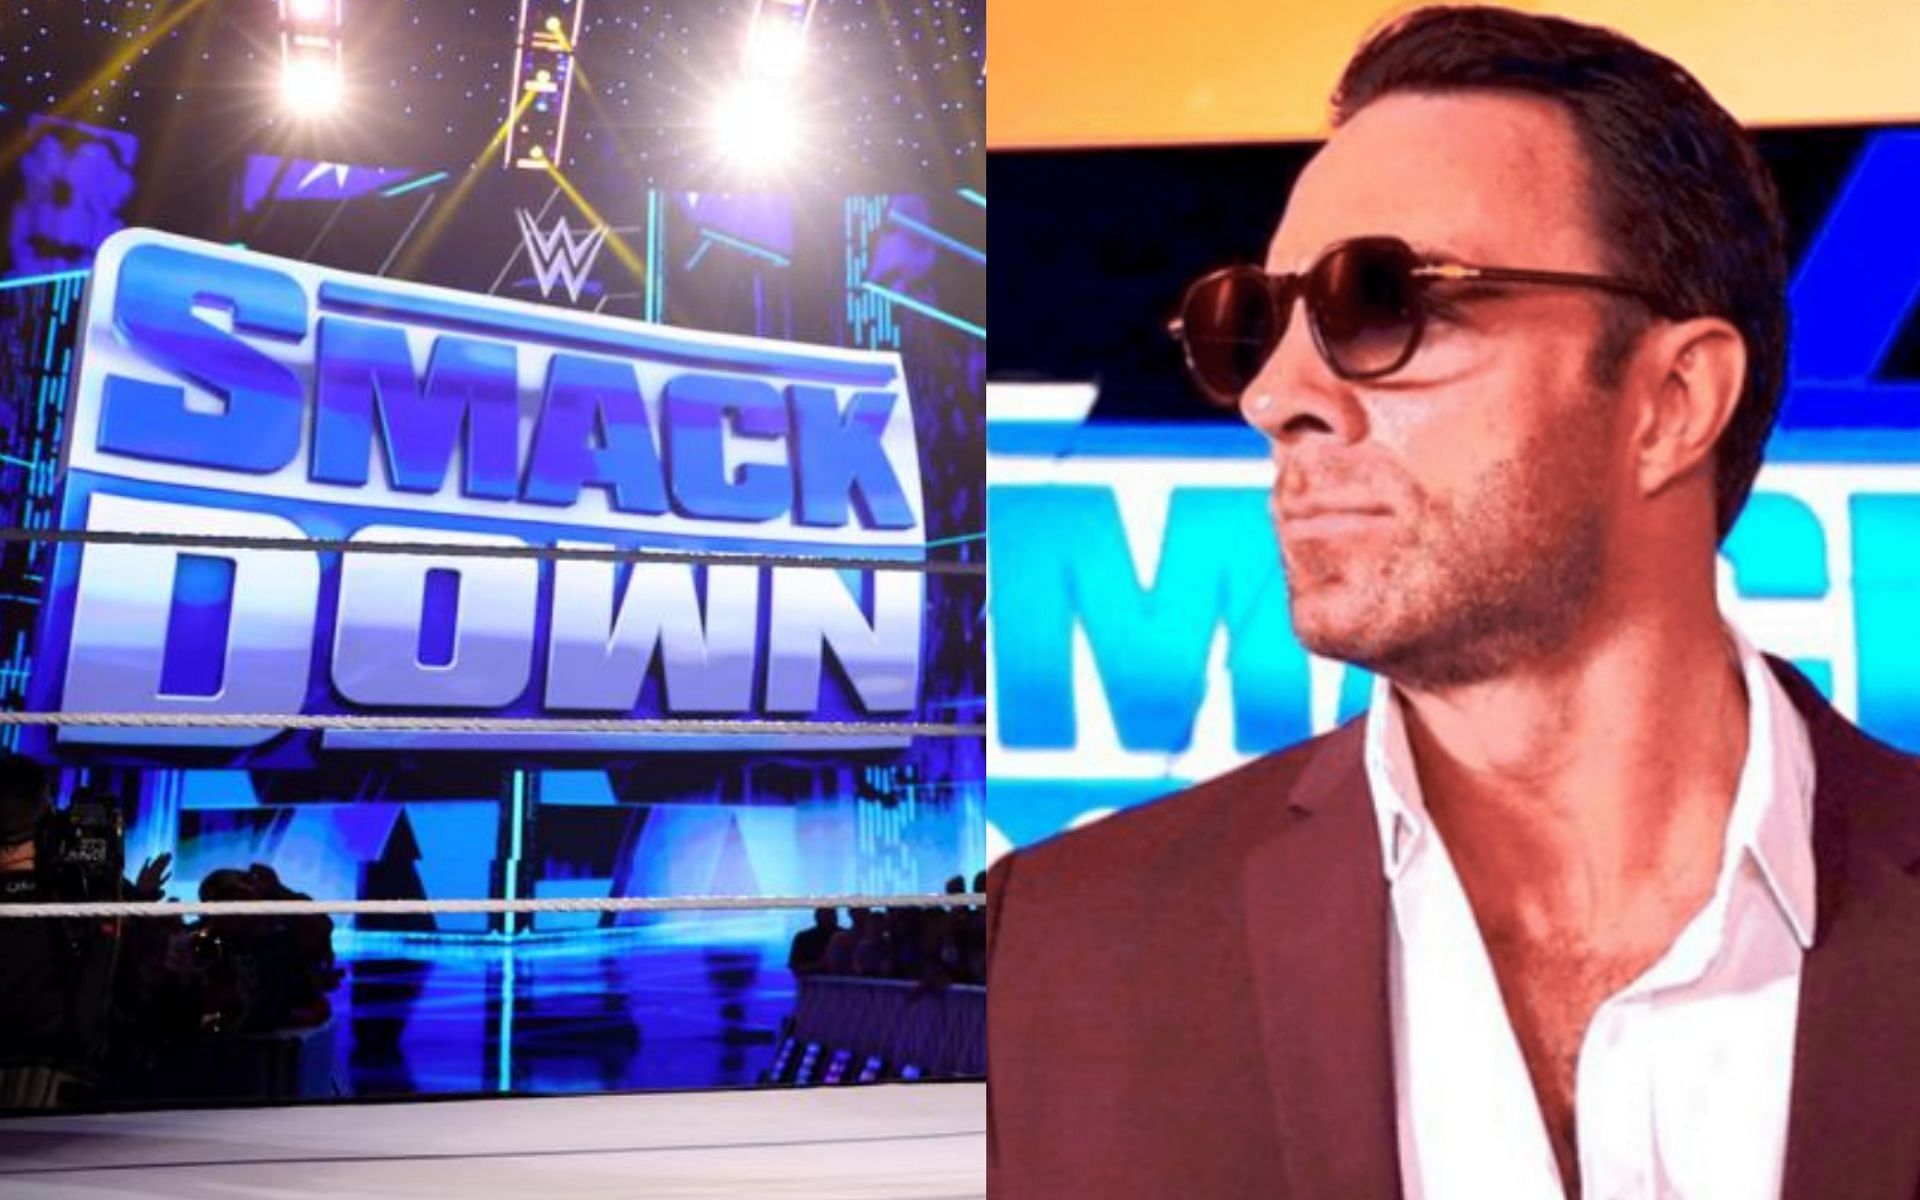 Max Dupri was set to appear on SmackDown